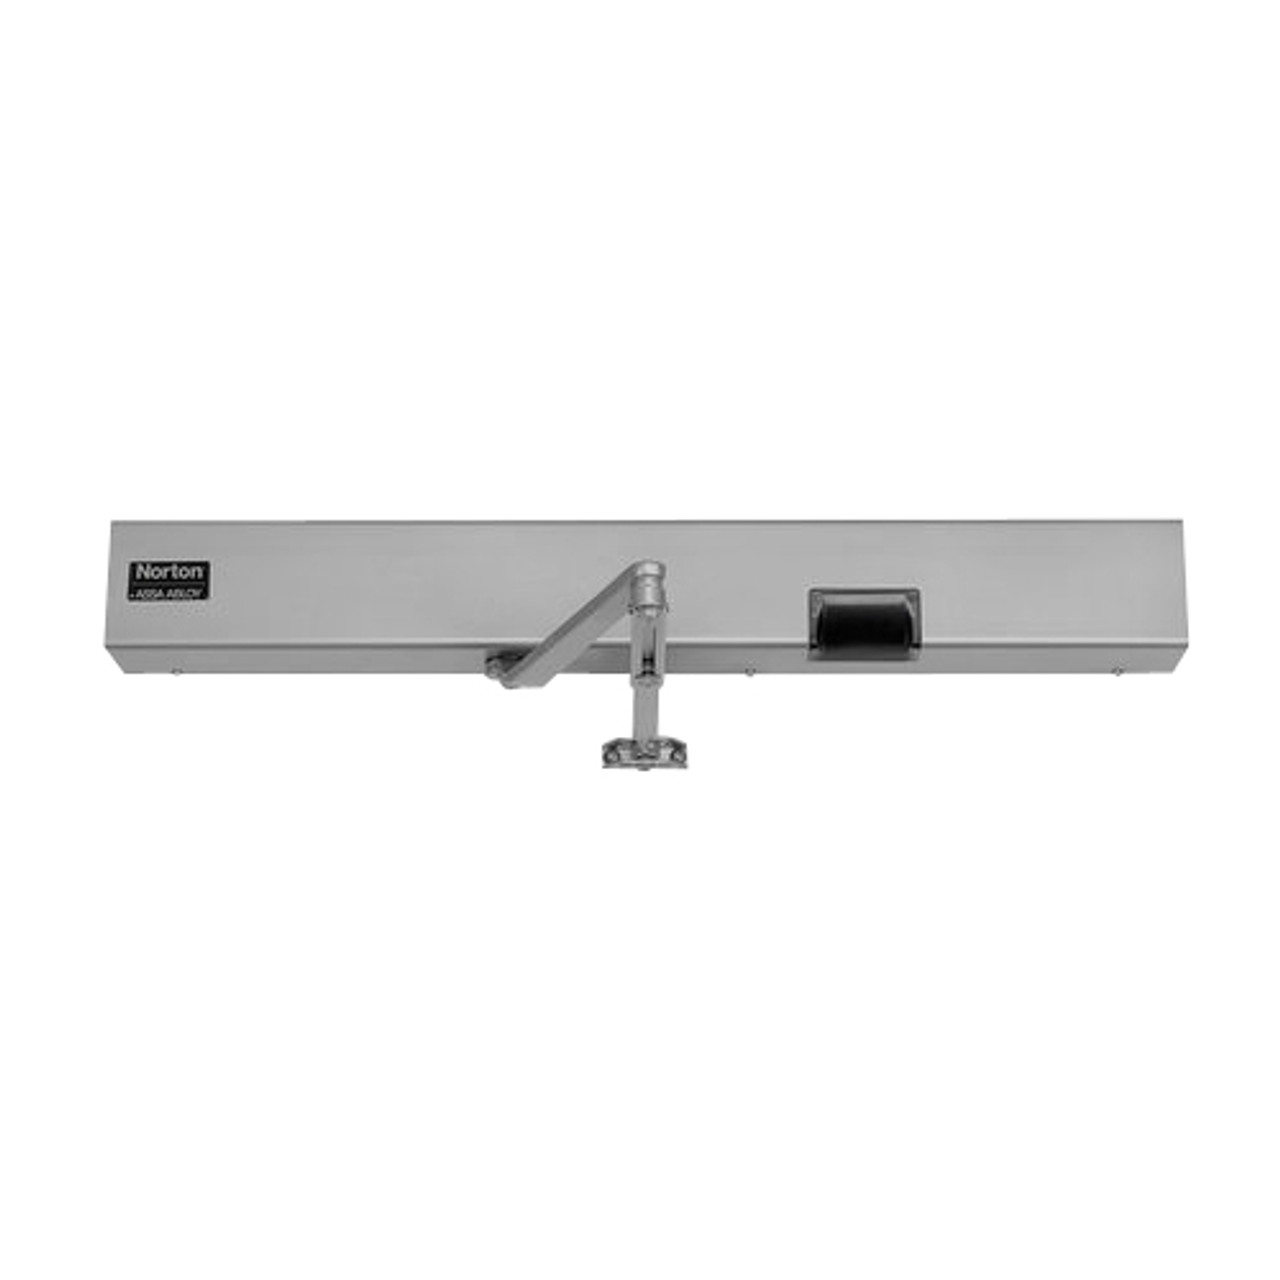 7133SZ-LH-120VAC-689 Norton 7100SZ Series Safe Zone Multi-Point Closer/Holder with Motion Sensor and Push Side Double Lever 13-1/2 inch Main Arm in Aluminum Finish